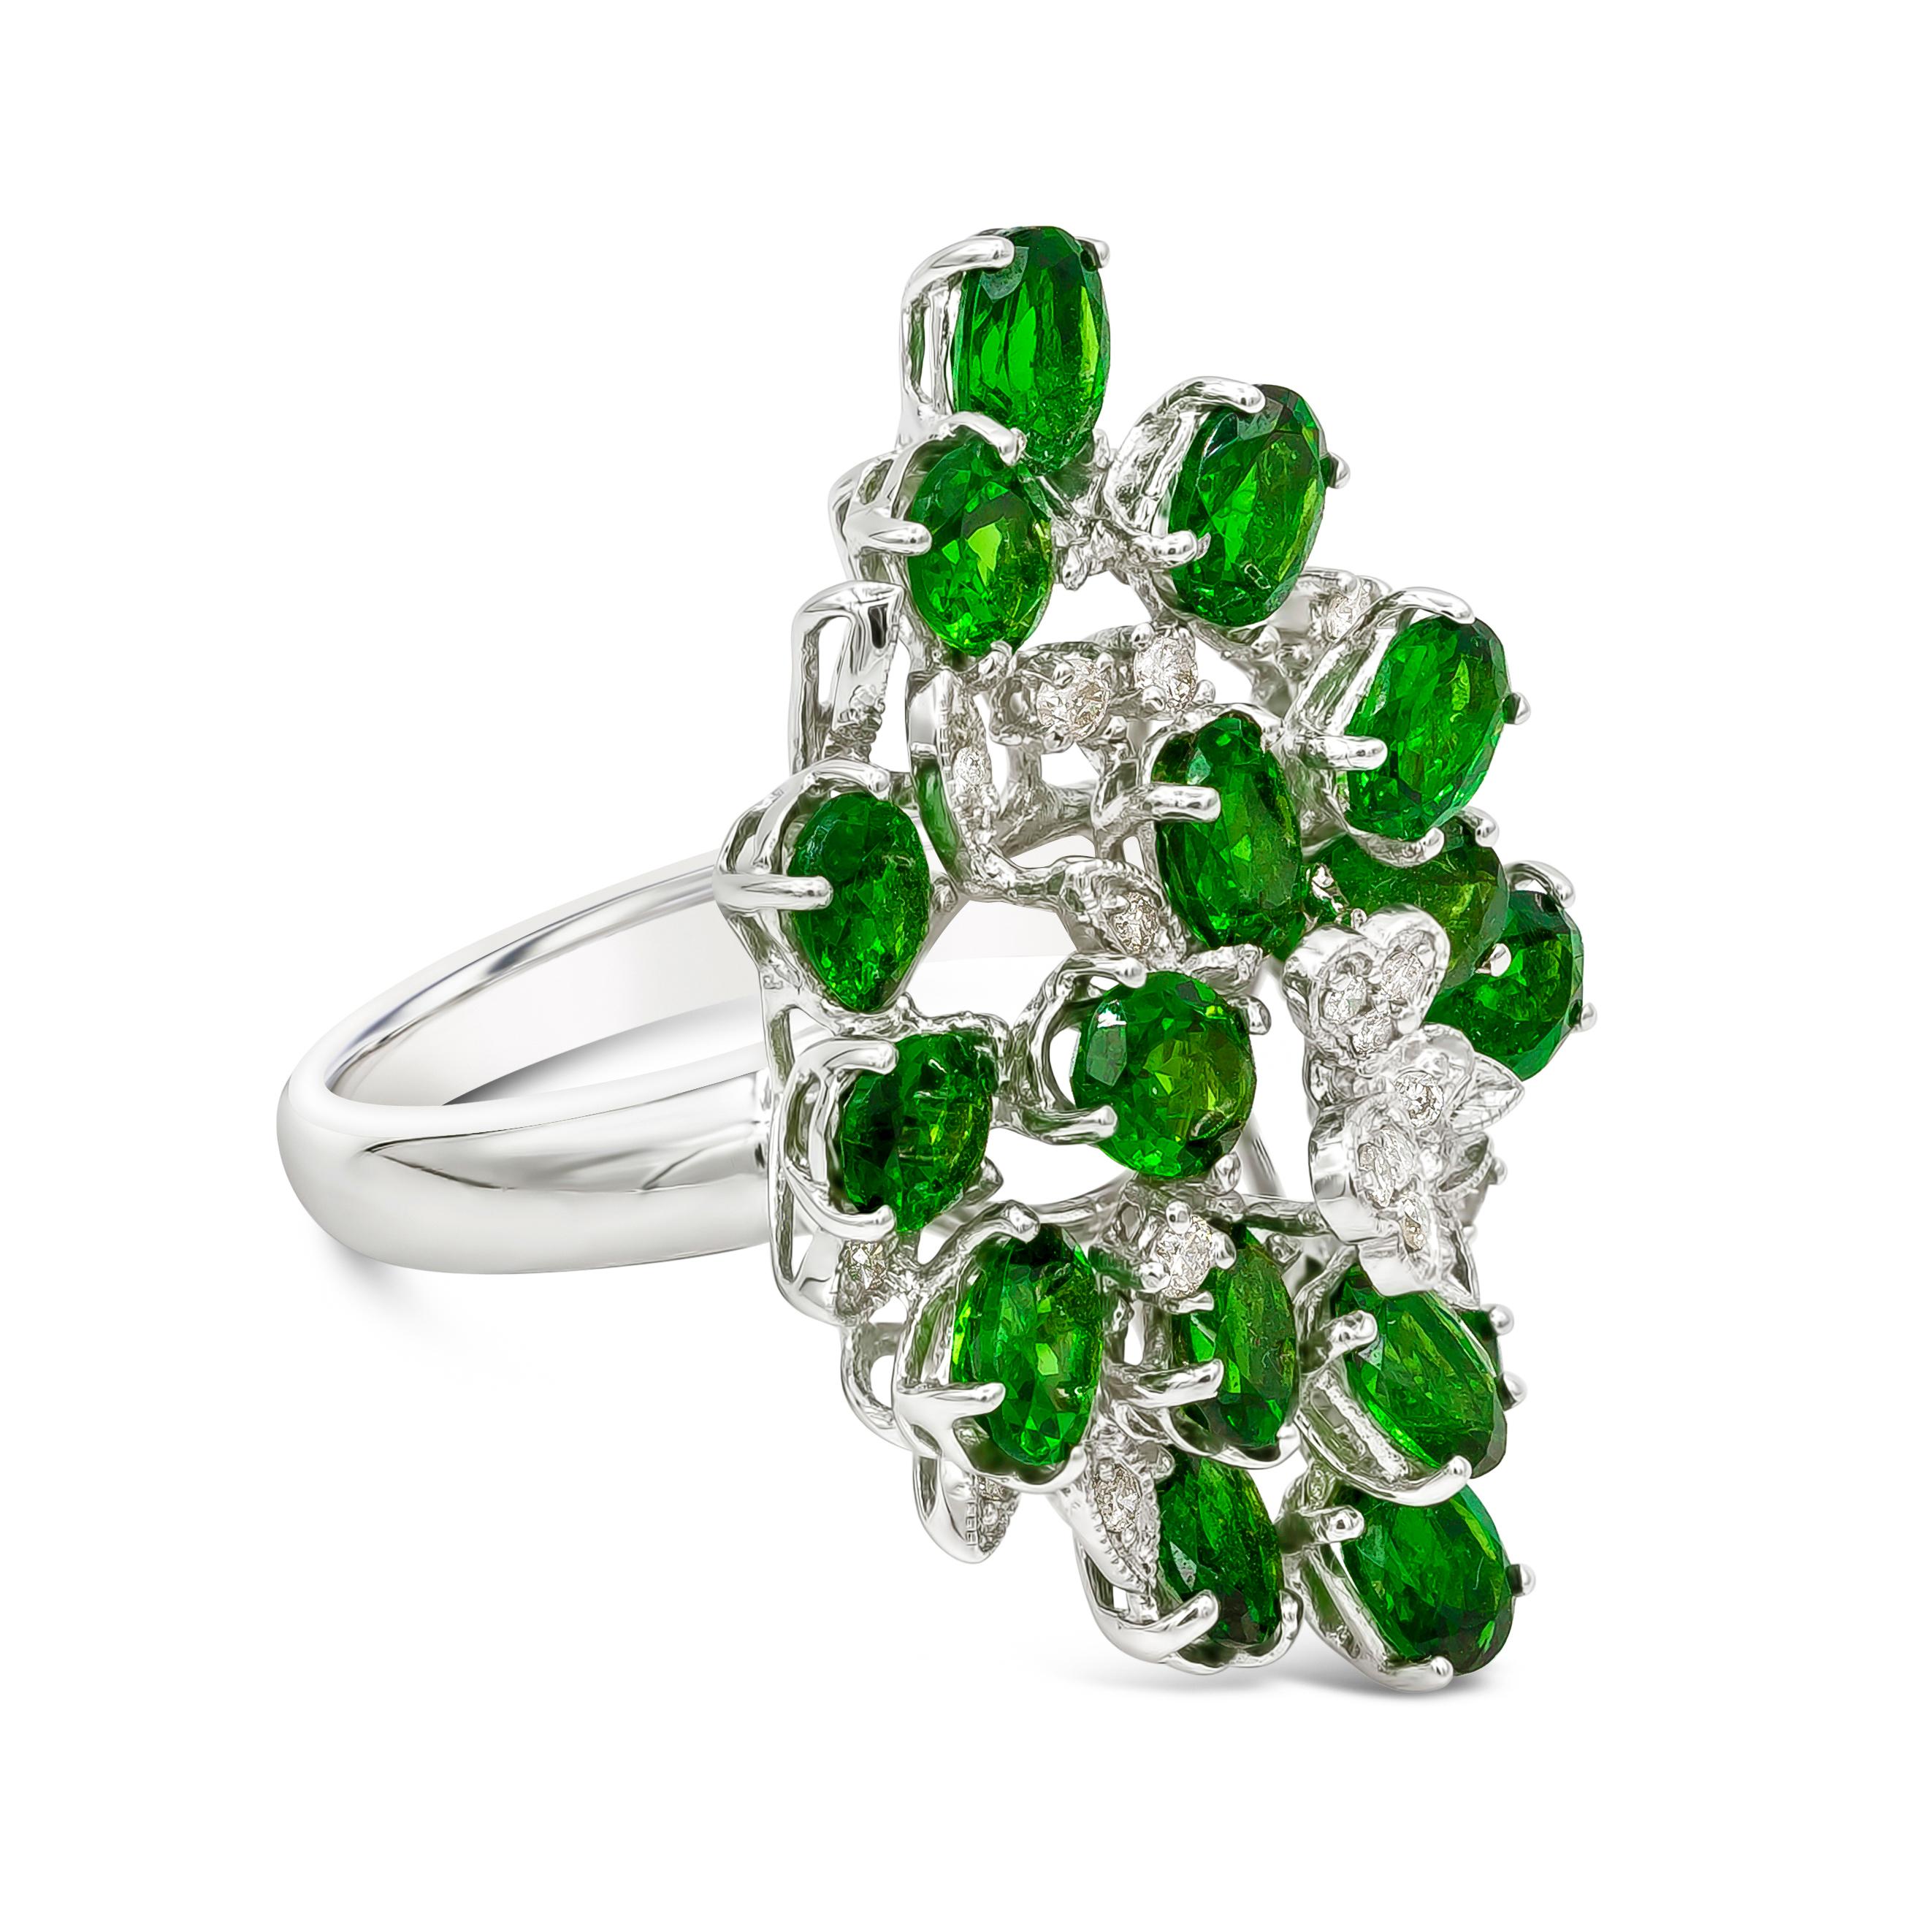 A piece of jewelry showcasing 17 color-rich oval cut tsavorite stones and 19 brilliant round diamonds that weighs 0.28 carats total. Tsavorite stones weighs 6.55 carats total. This magnificent open work design fashion ring is made in 18 karats white